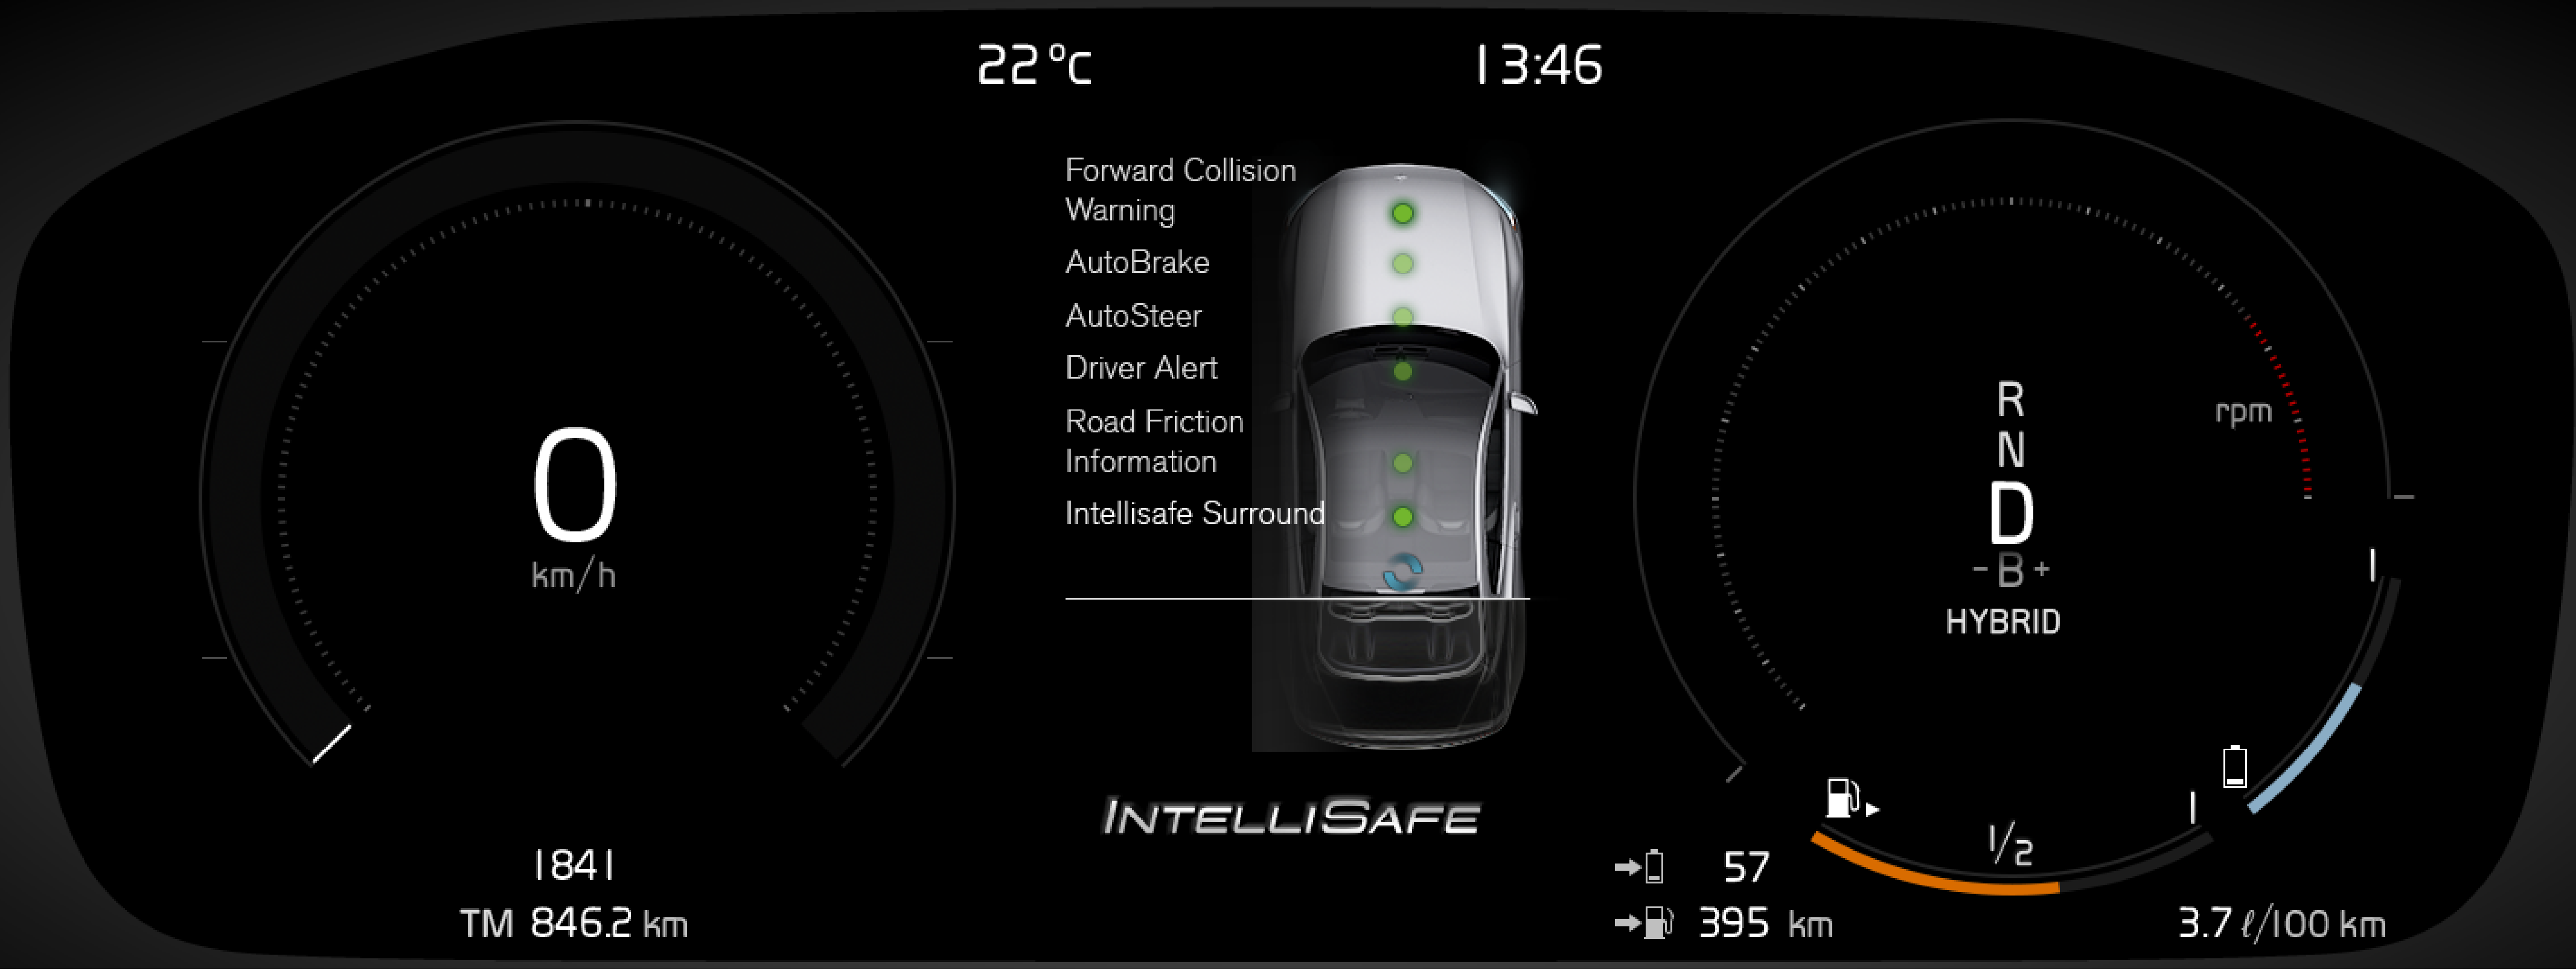 PS-1926-IntelliSafe security check in driver display